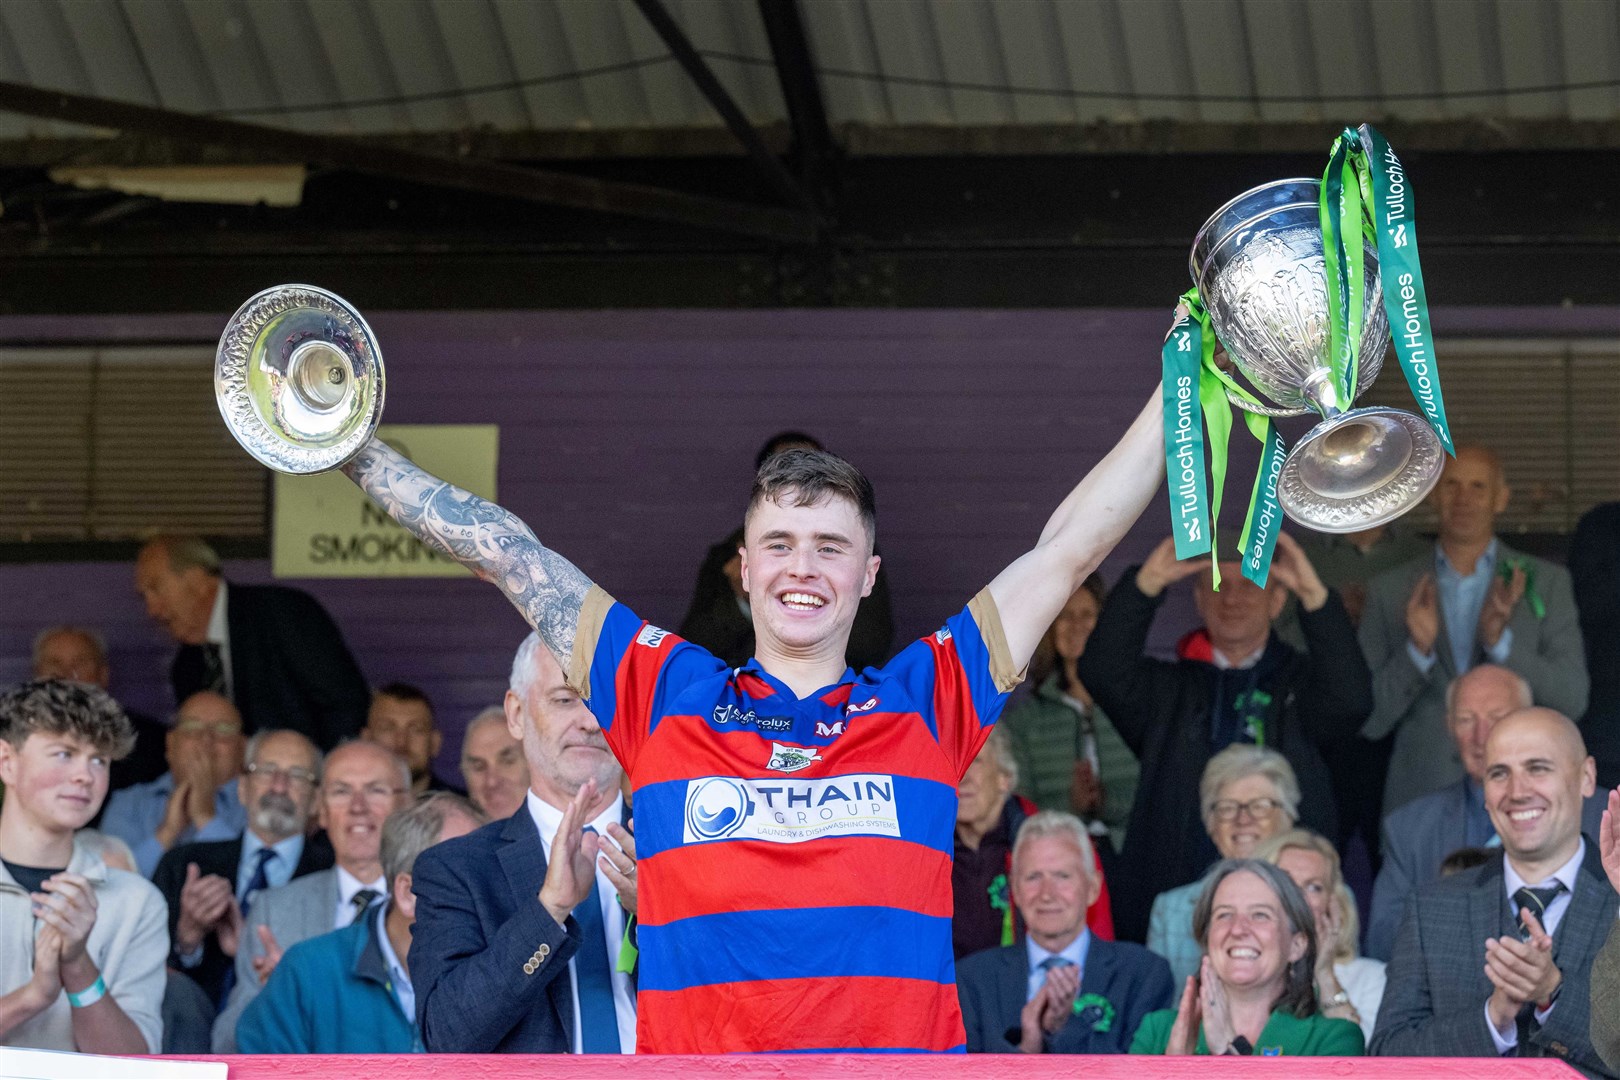 Kingussie captain James Falconer lifts the Camanachd Cup after the 1-0 win over Oban Camanachd in the 2023 Tulloch Homes Camanachd Cup Final played at The Bught, Inverness.